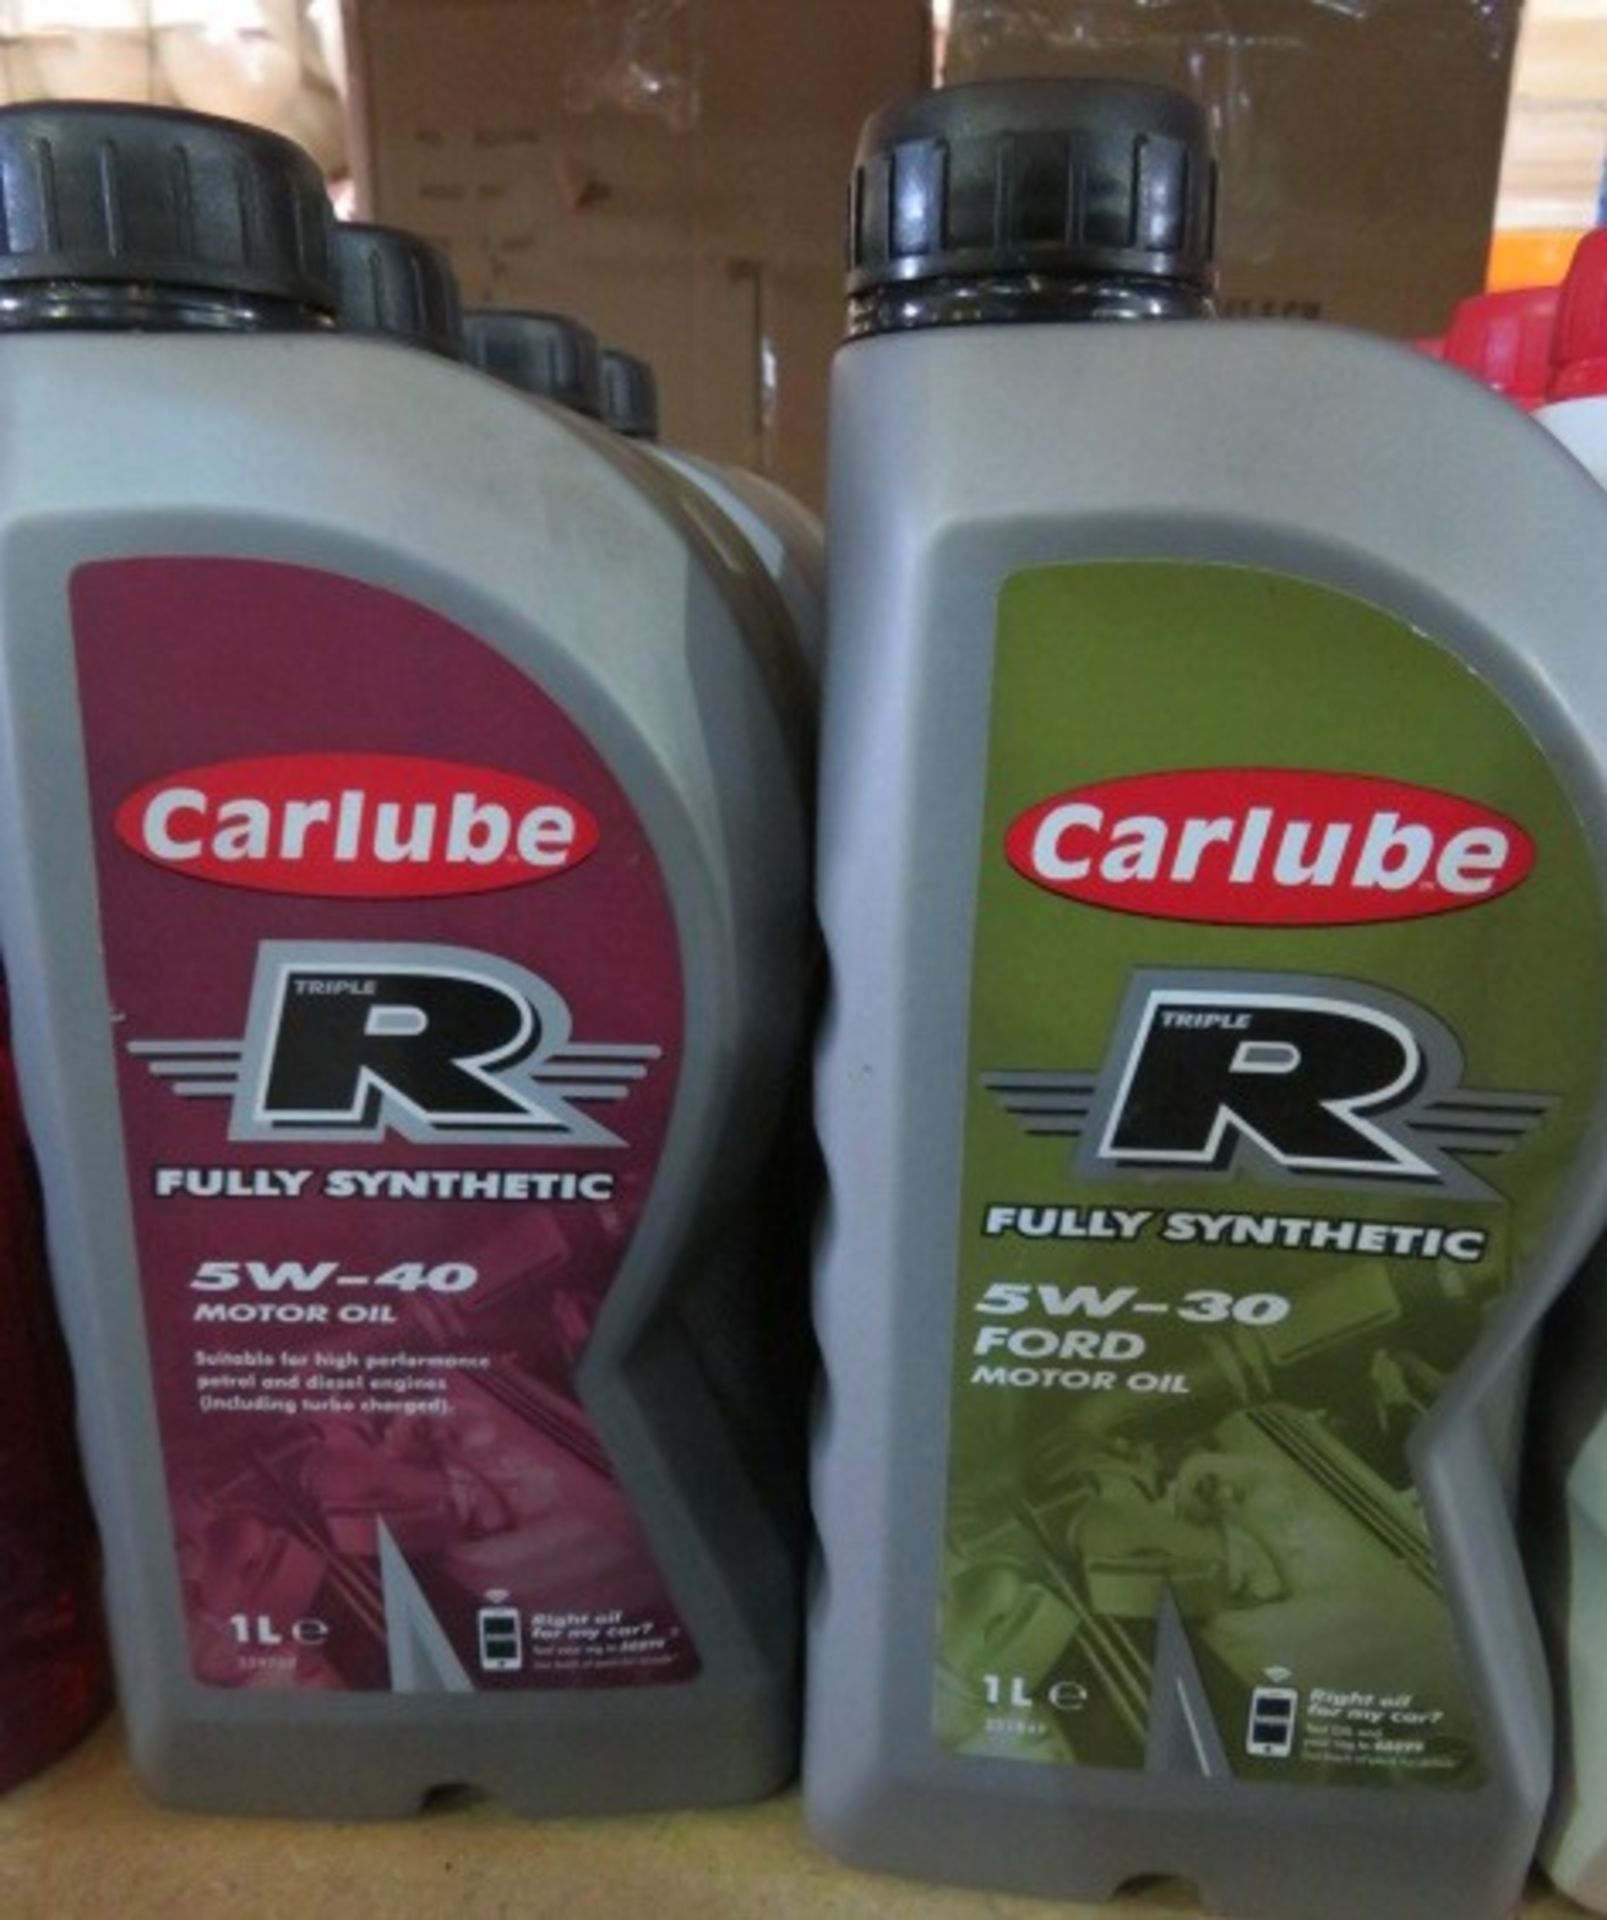 9x Carlube 2-Stroke Motorcycle Oil XL 500ml. UK DELIVERY AVAILABLE FROM £14 PLUS VAT - HUGE PR...